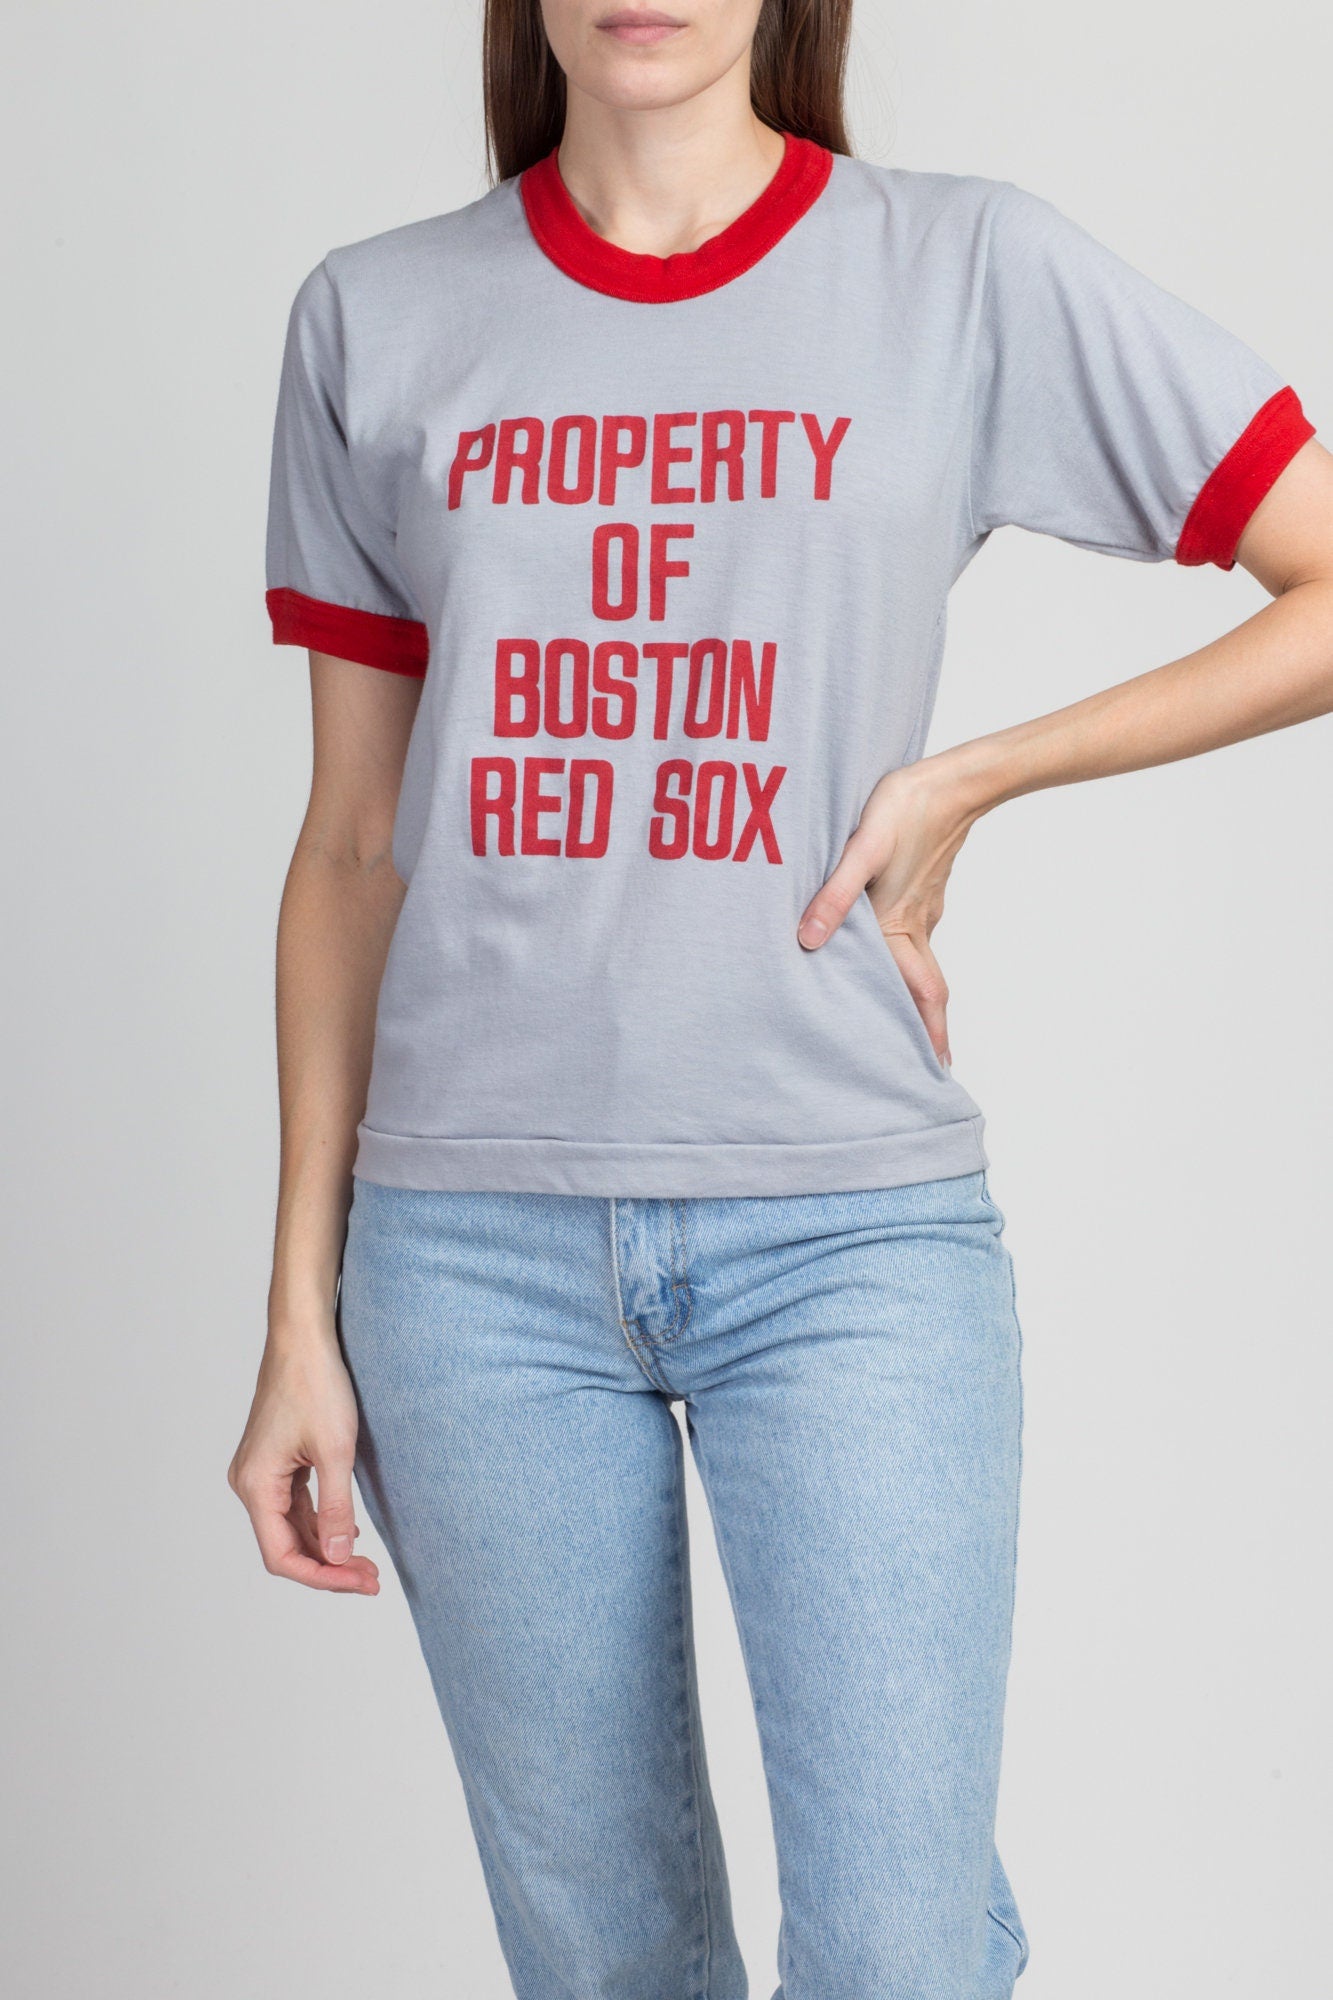 red sox t shirts near me